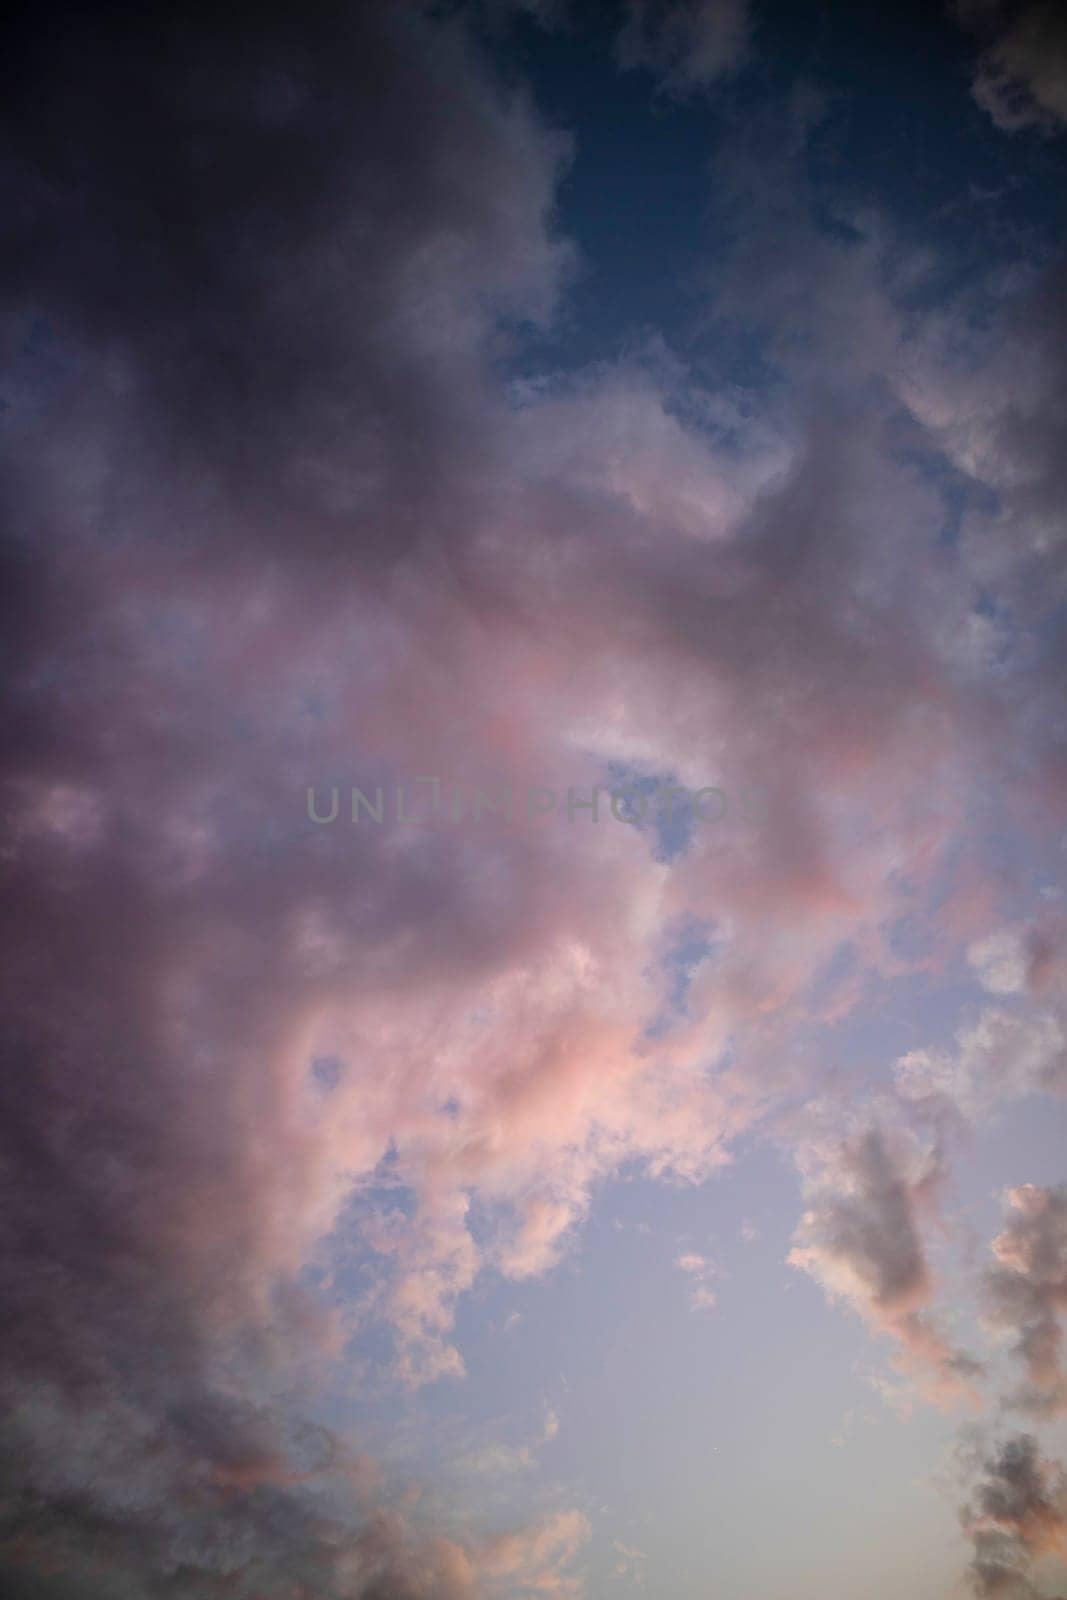 Photographic documentation of clouds at sunset  by fotografiche.eu